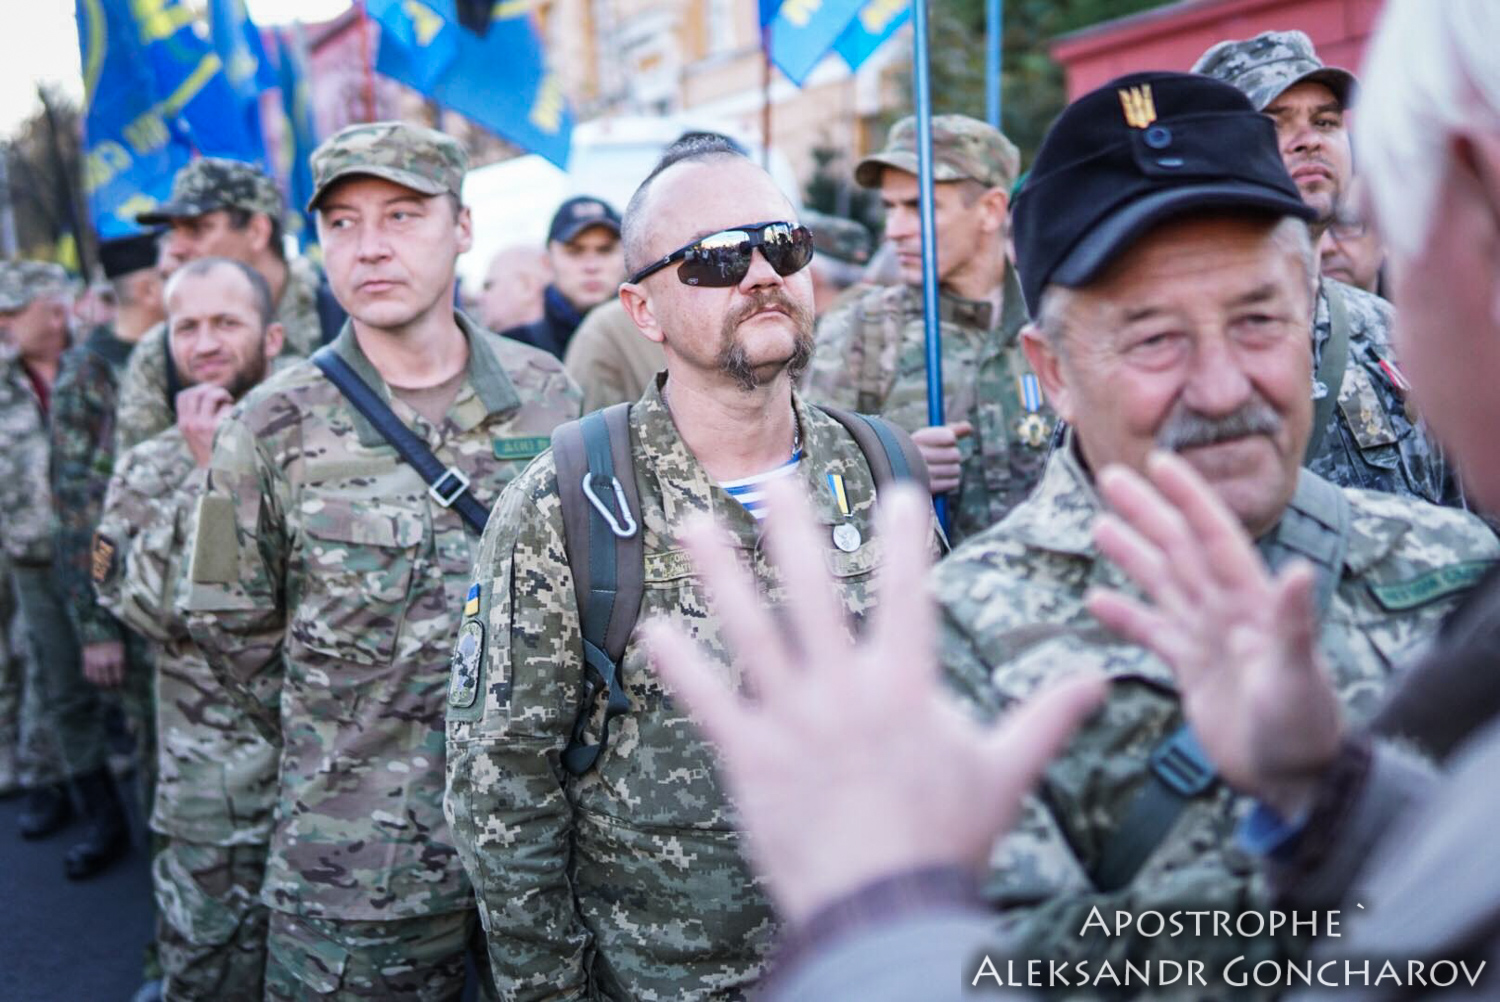 German neo-Nazis march with Ukrainian nationalists in UPA march ~~